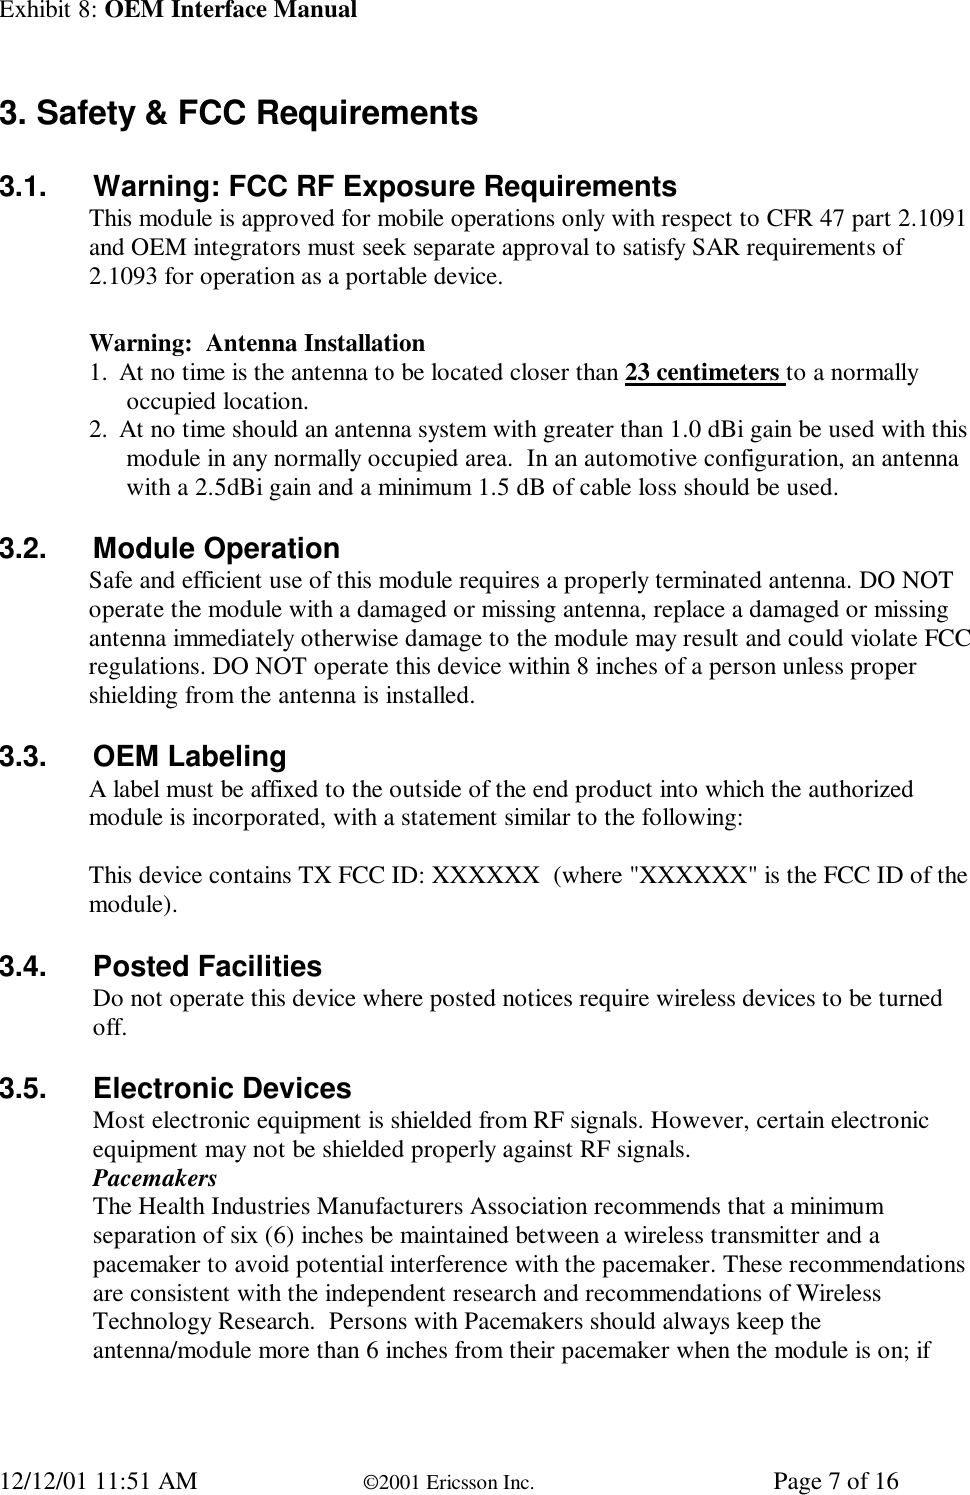 Exhibit 8: OEM Interface Manual12/12/01 11:51 AM ©2001 Ericsson Inc. Page 7 of 163. Safety &amp; FCC Requirements3.1. Warning: FCC RF Exposure RequirementsThis module is approved for mobile operations only with respect to CFR 47 part 2.1091and OEM integrators must seek separate approval to satisfy SAR requirements of2.1093 for operation as a portable device.Warning:  Antenna Installation1. At no time is the antenna to be located closer than 23 centimeters to a normallyoccupied location.2. At no time should an antenna system with greater than 1.0 dBi gain be used with thismodule in any normally occupied area.  In an automotive configuration, an antennawith a 2.5dBi gain and a minimum 1.5 dB of cable loss should be used.3.2. Module OperationSafe and efficient use of this module requires a properly terminated antenna. DO NOToperate the module with a damaged or missing antenna, replace a damaged or missingantenna immediately otherwise damage to the module may result and could violate FCCregulations. DO NOT operate this device within 8 inches of a person unless propershielding from the antenna is installed.3.3. OEM LabelingA label must be affixed to the outside of the end product into which the authorizedmodule is incorporated, with a statement similar to the following:This device contains TX FCC ID: XXXXXX  (where &quot;XXXXXX&quot; is the FCC ID of themodule).3.4. Posted FacilitiesDo not operate this device where posted notices require wireless devices to be turnedoff.3.5. Electronic DevicesMost electronic equipment is shielded from RF signals. However, certain electronicequipment may not be shielded properly against RF signals.PacemakersThe Health Industries Manufacturers Association recommends that a minimumseparation of six (6) inches be maintained between a wireless transmitter and apacemaker to avoid potential interference with the pacemaker. These recommendationsare consistent with the independent research and recommendations of WirelessTechnology Research.  Persons with Pacemakers should always keep theantenna/module more than 6 inches from their pacemaker when the module is on; if